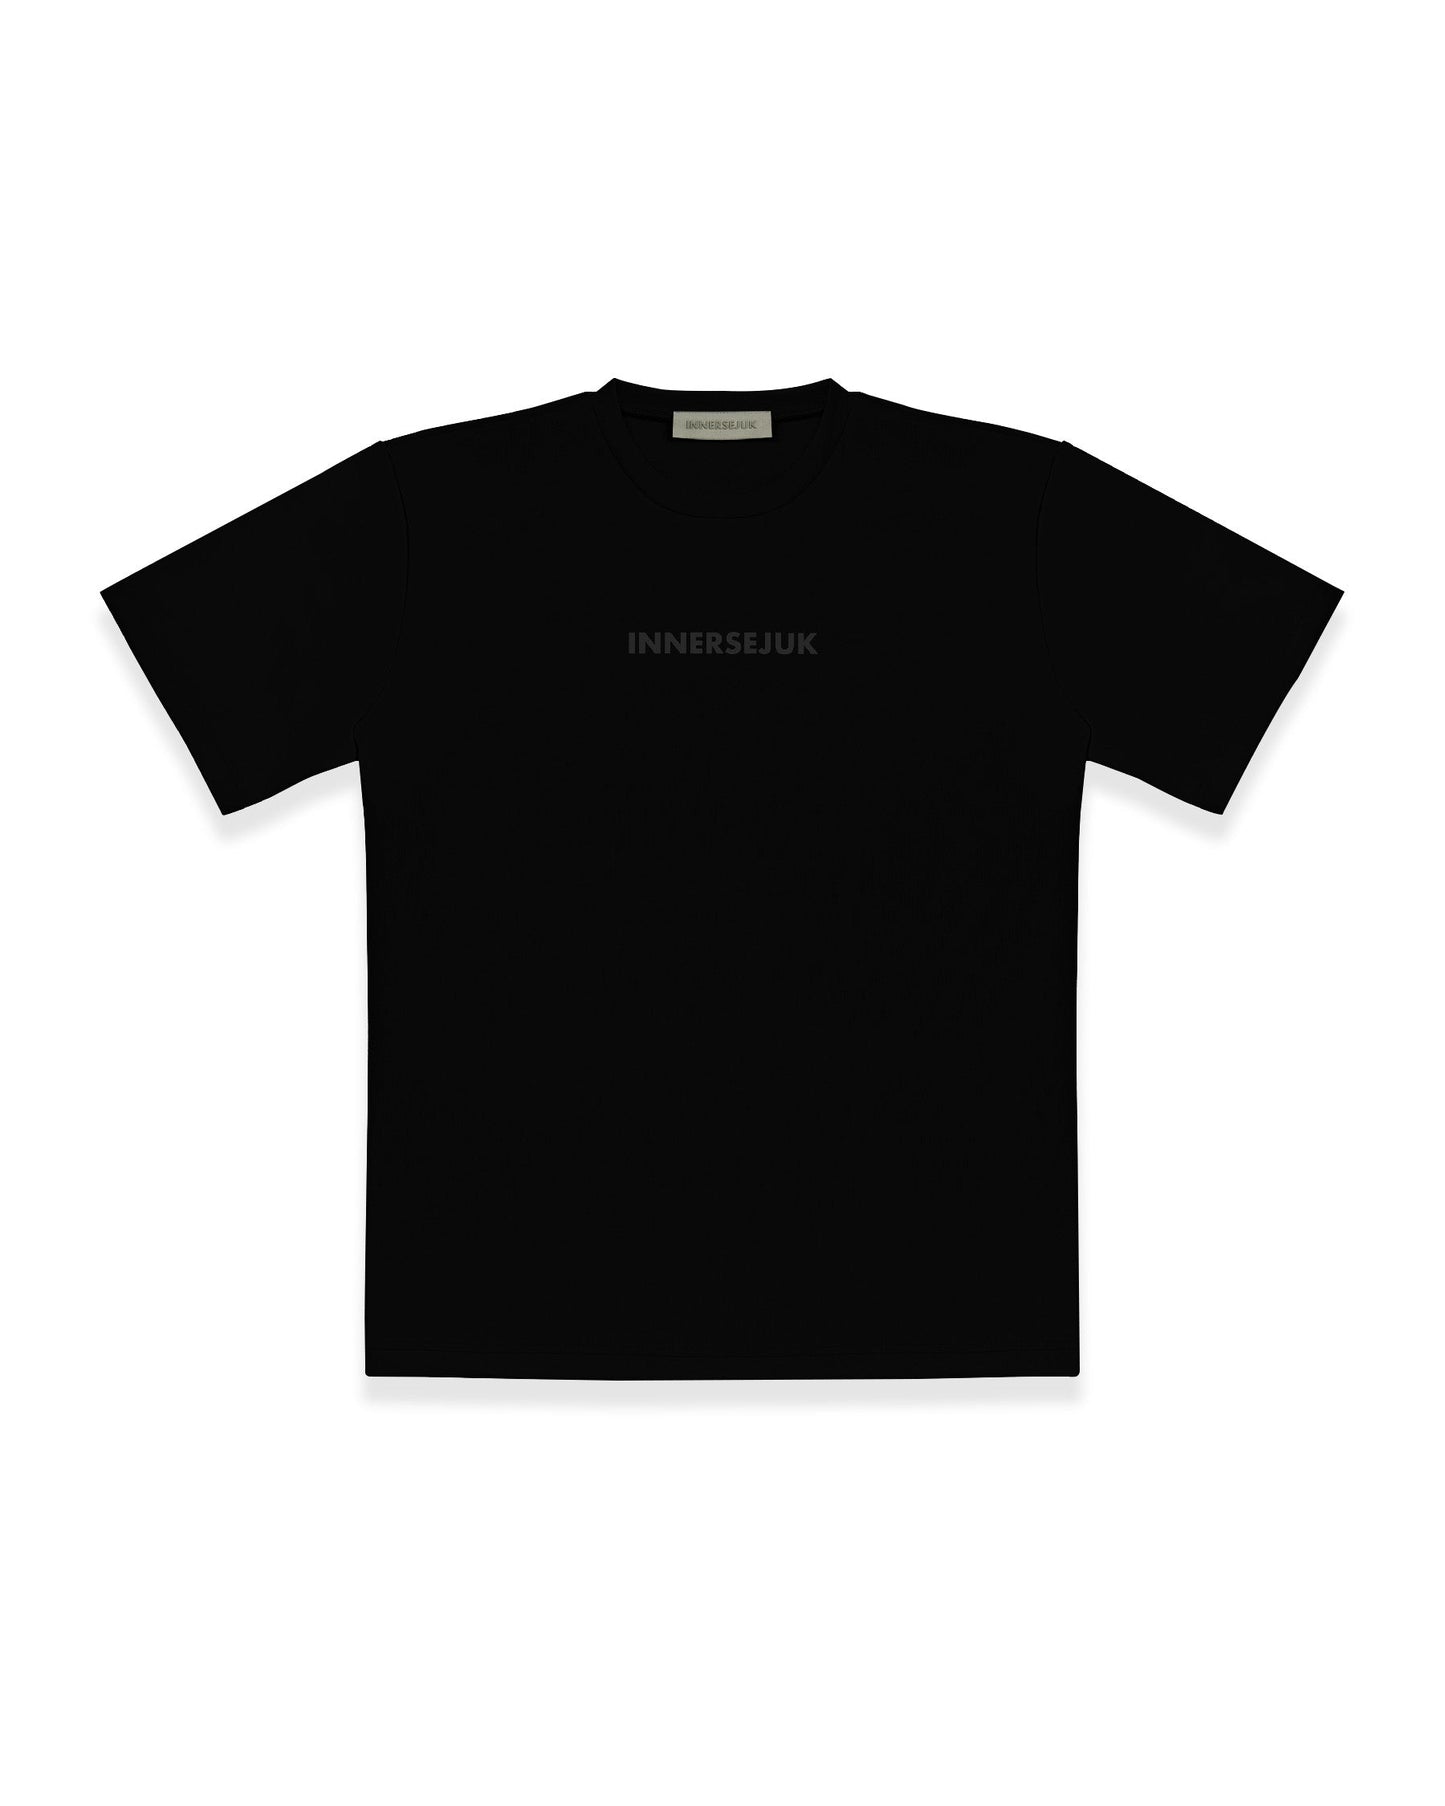 THE SIGNATURE RELAXED TEE IN BLACK